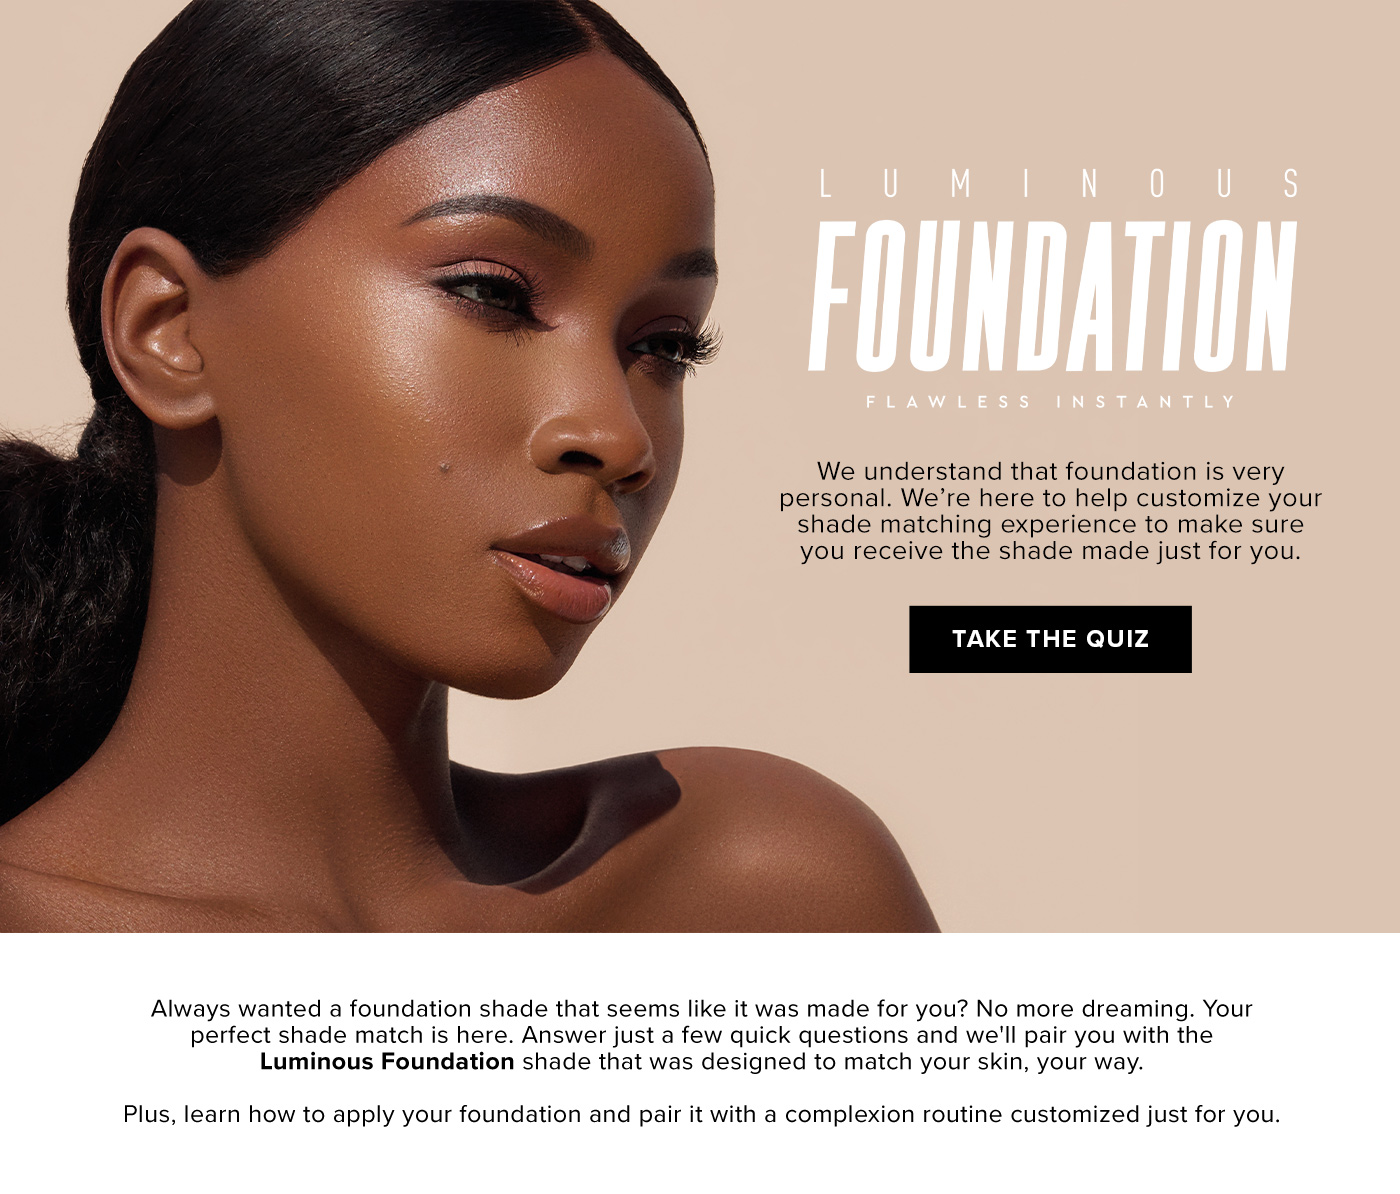 Luminous Foundation. Flawless Instantly.